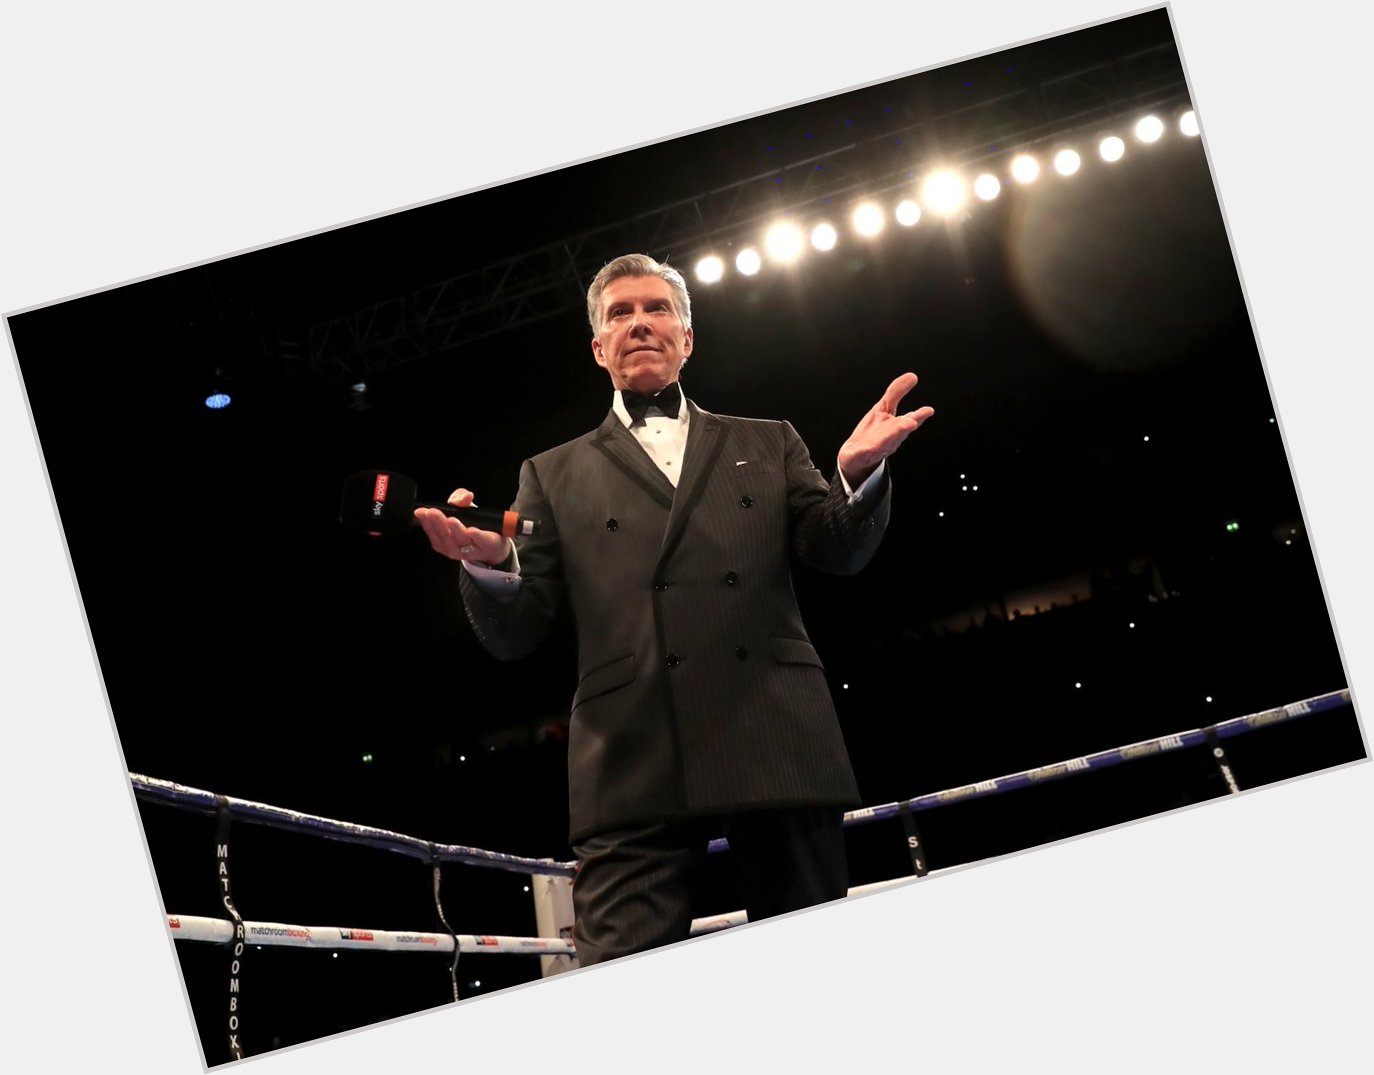   Happy birthday to the man with most iconic voice in sport, Michael Buffer!

\"Let\s get ready to ruuuuuuuumble!\" 